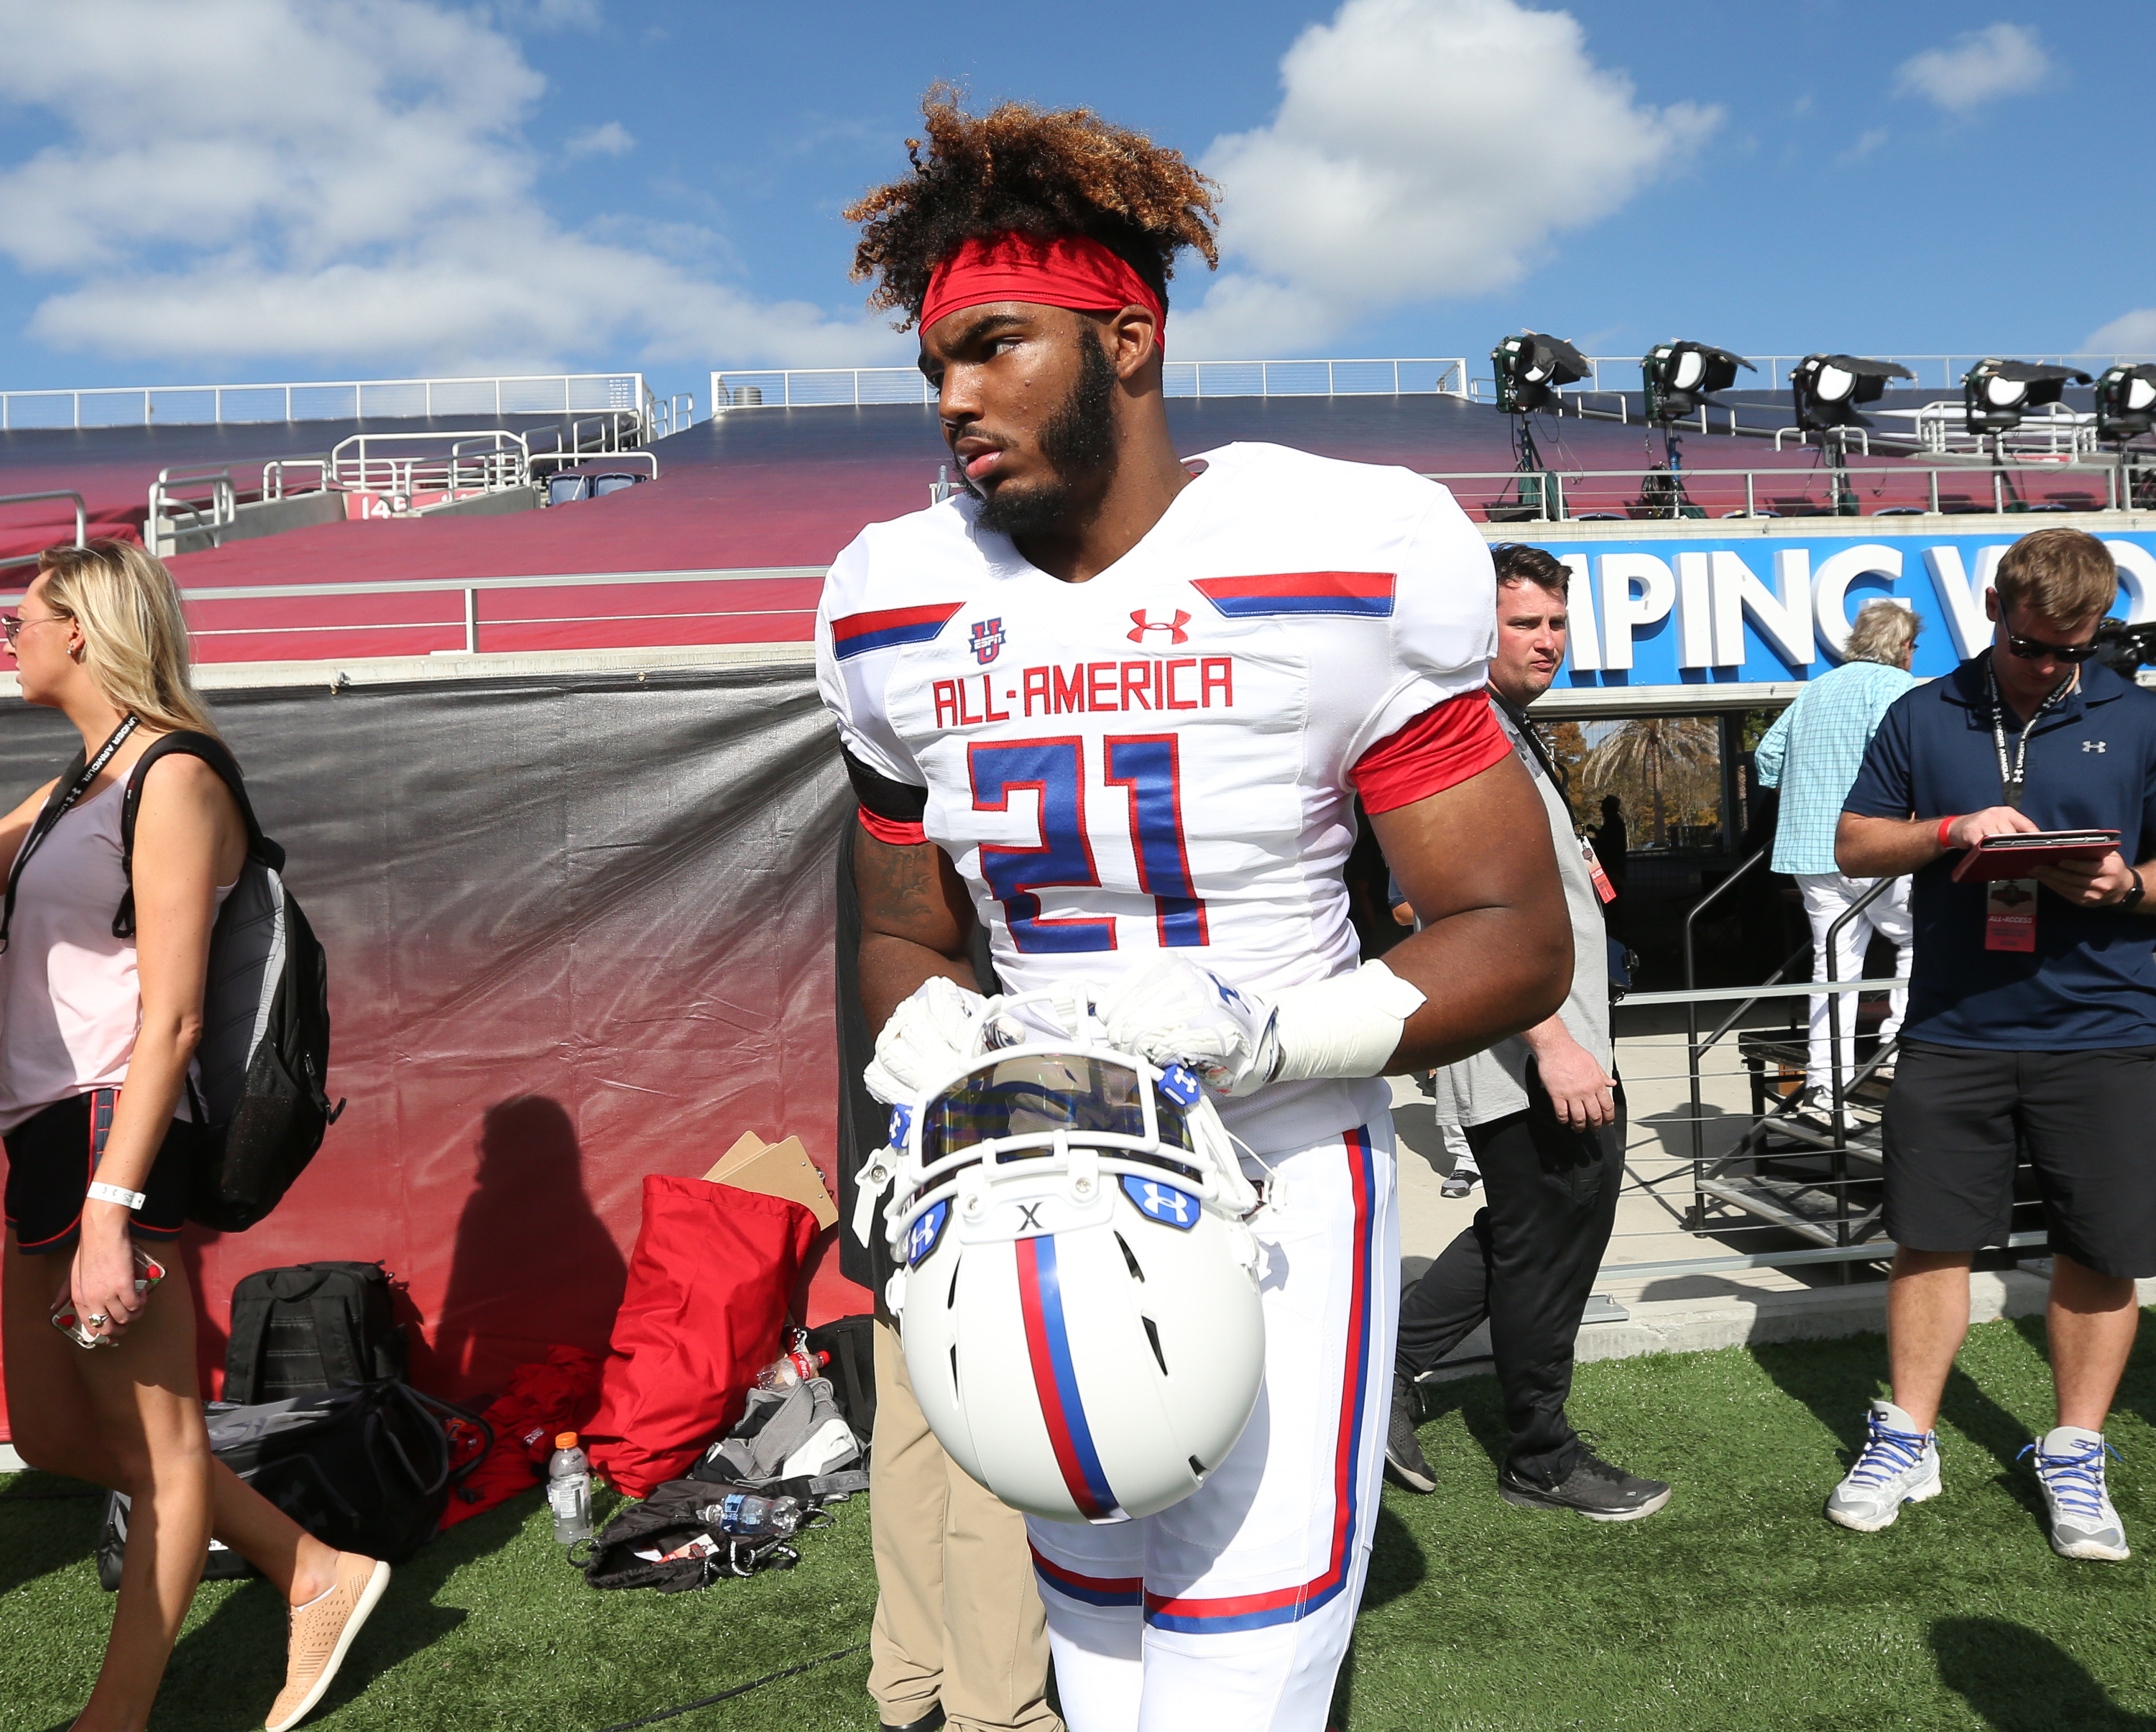 1/1/17 1:02:17 PM -- Orlando, FL, U.S.A  -- Team Highlight linebacker Nathan Proctor Jr. (21) goes back onto the field after announcing that he'll attend the Virginia Tech University during the 2017 Under Armour All-America High School Football game. Team Armour defeated Team Highlight 24-21. --    Photo by Matt Stamey-USA TODAY  Sports Images, Gannett ORG XMIT:  US 135884 Under Armour foo 1/1/2017 [Via MerlinFTP Drop]